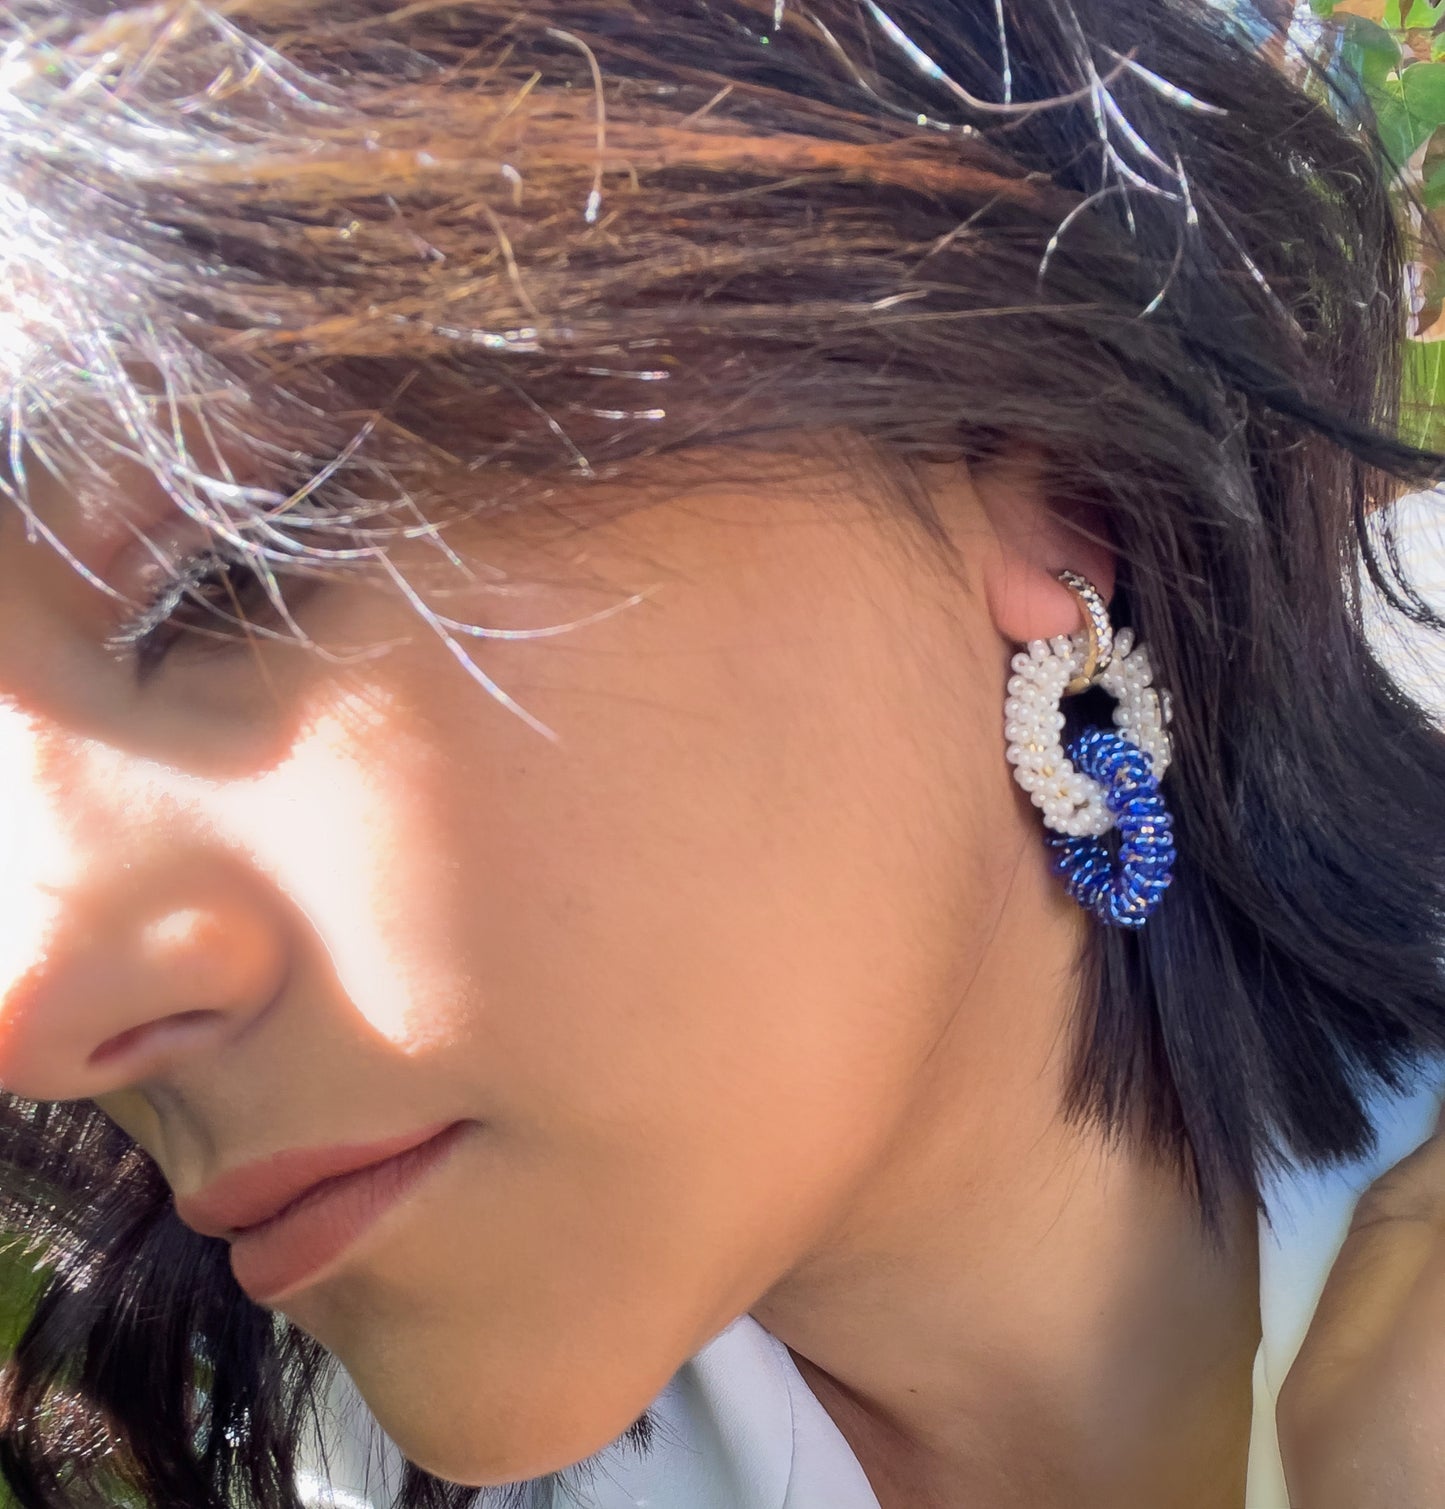 Infinity Earrings in Blue and White - Handcrafted with Japanese Miyuki Beads on Stainless Steel Hoops